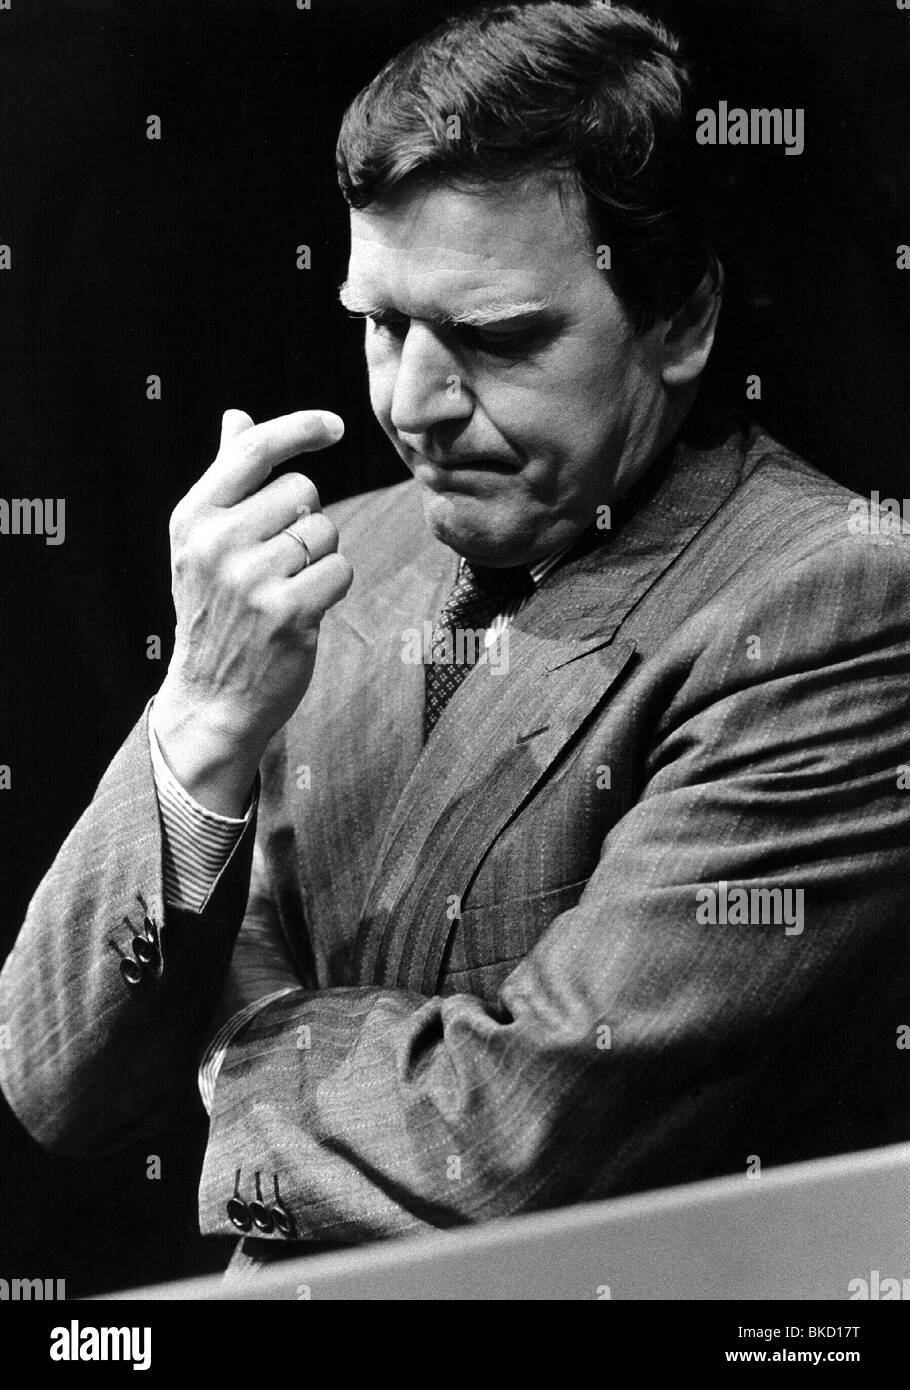 Schroeder, Gerhard, * 7.4.1944, German politician (SPD), as top candidate for Lower Saxony, 3.5.1986, Stock Photo